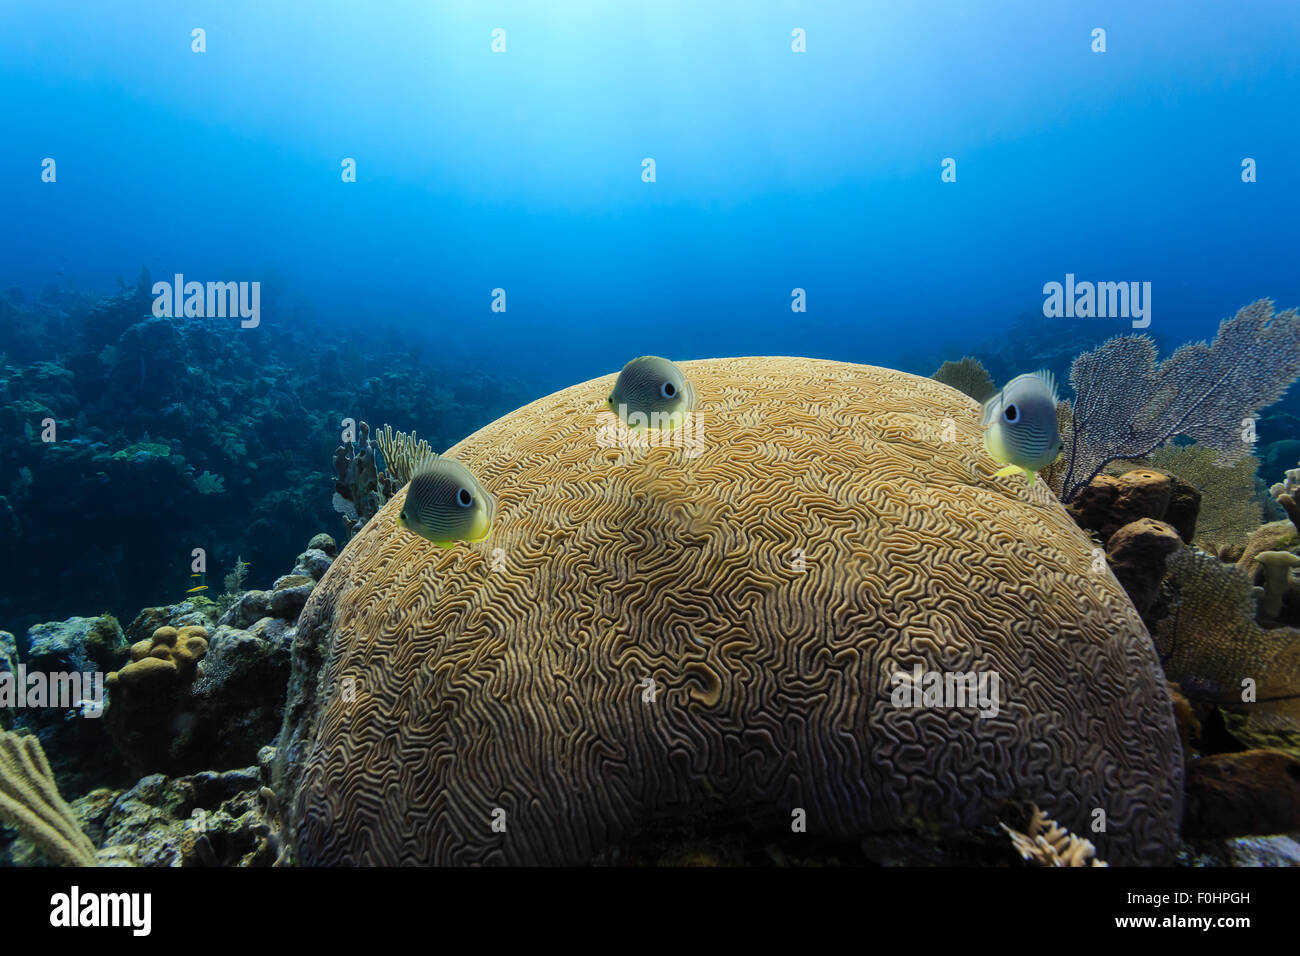 Foureye butterflyfish, Chaetodon capistratus, swim over brain coral in the blue waters of a tropical reef Stock Photo